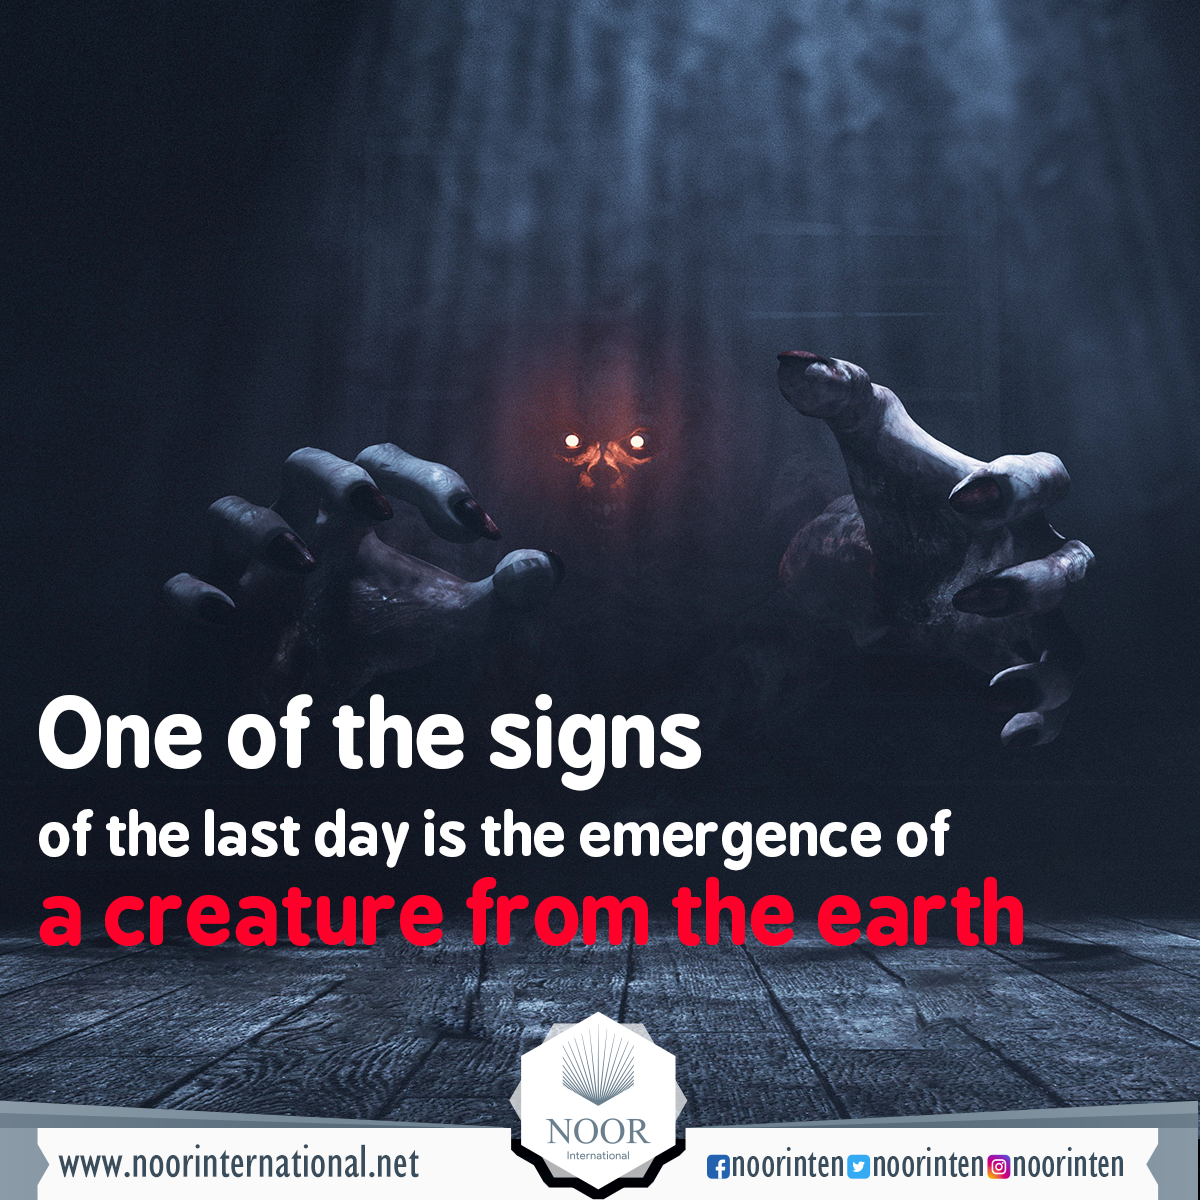 One of the signs of the last day is the emergence of a creature from the earth